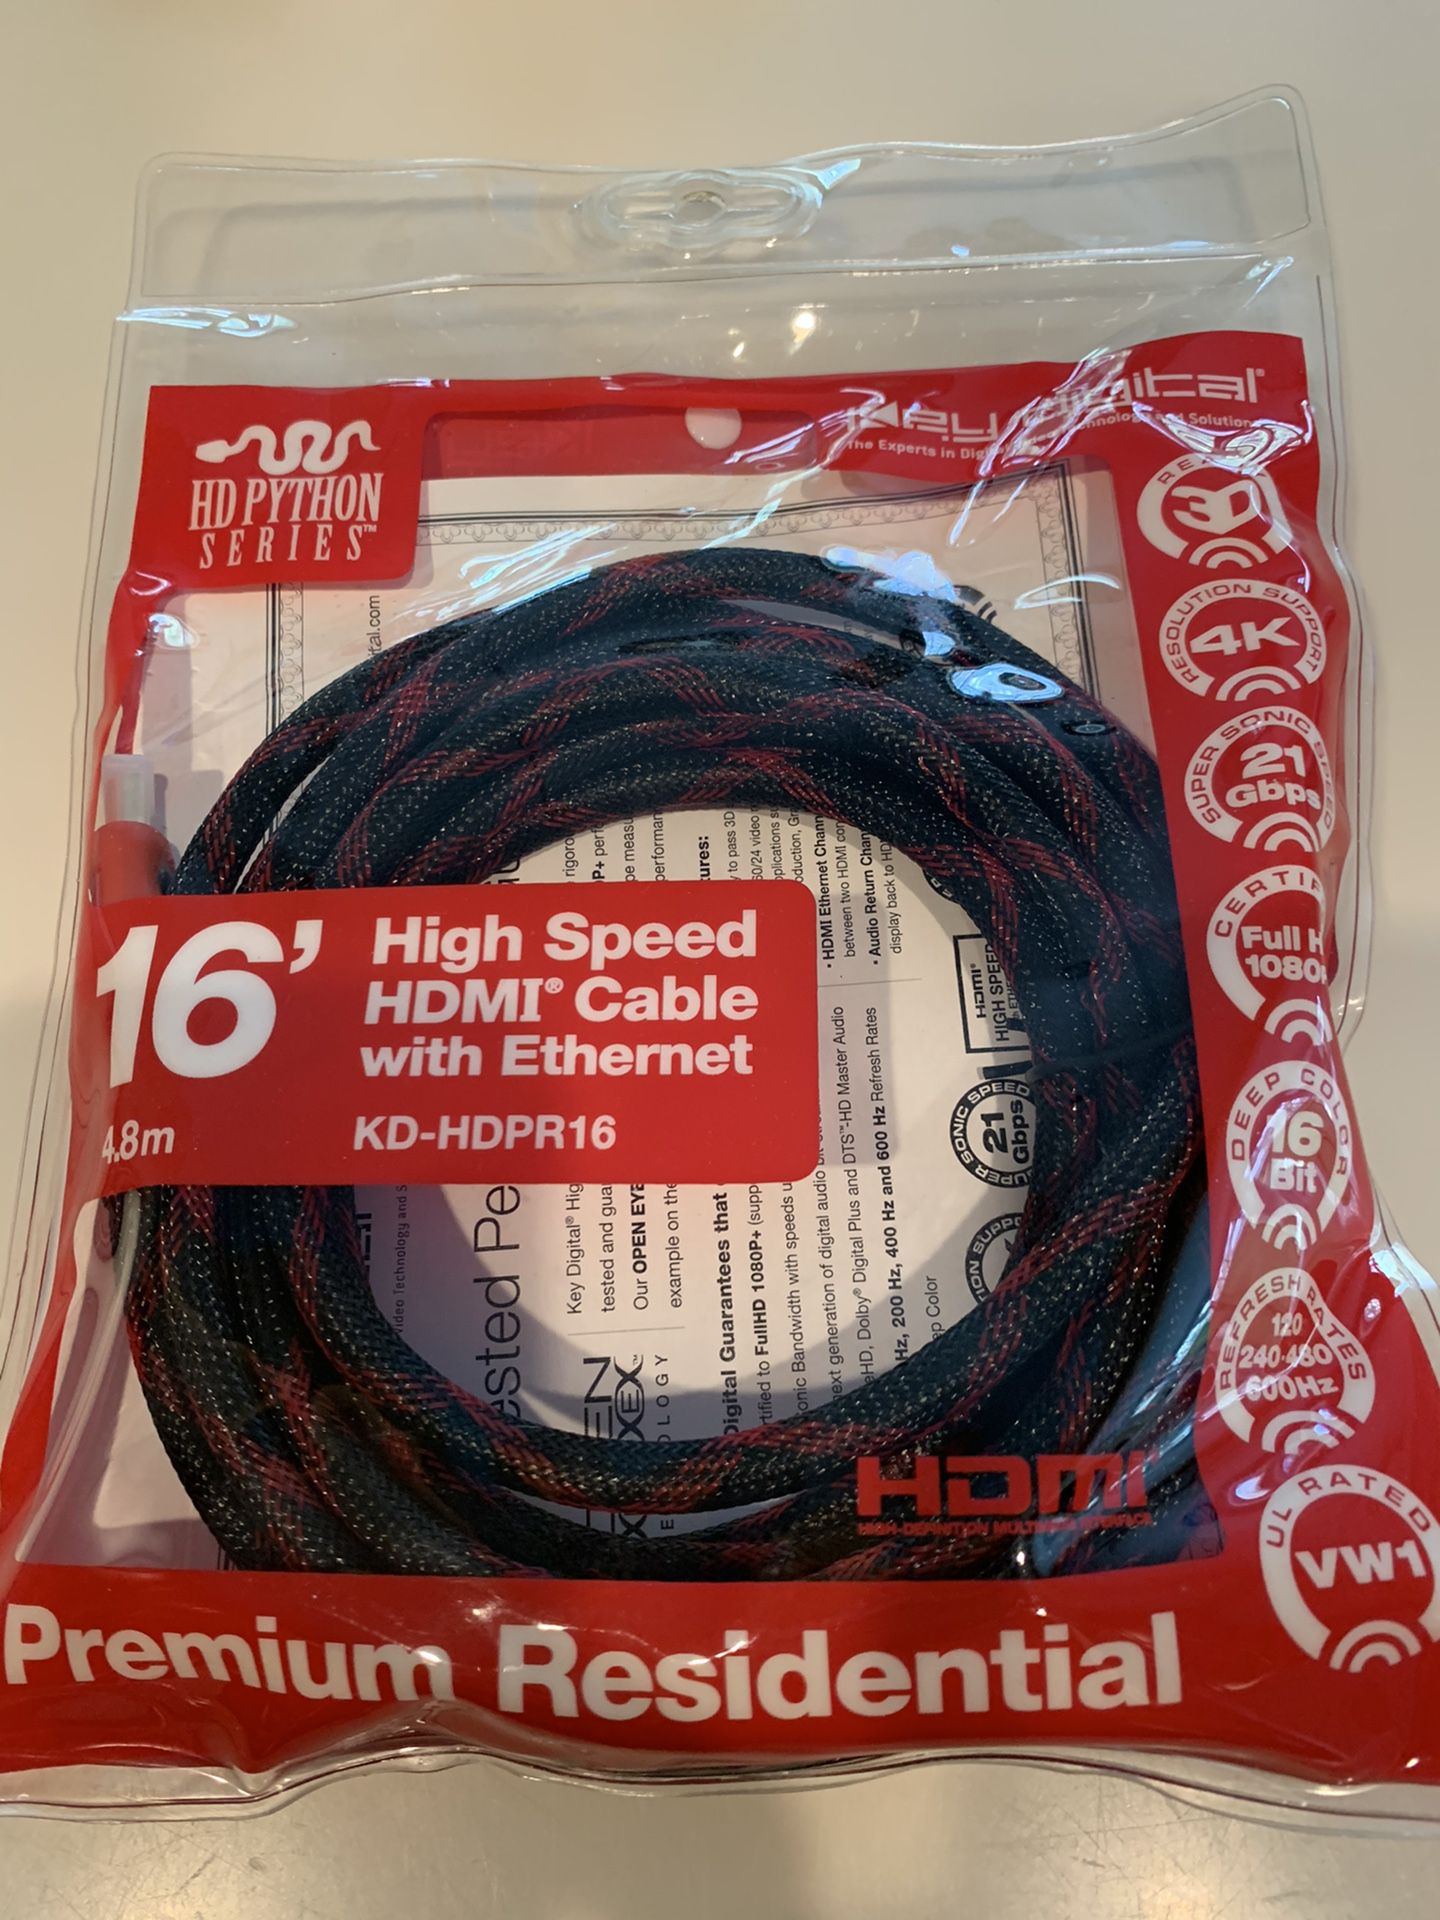 Key Digital Python Series 16ft High Speed HDMI Cable with Ethernet KD-HDPR16